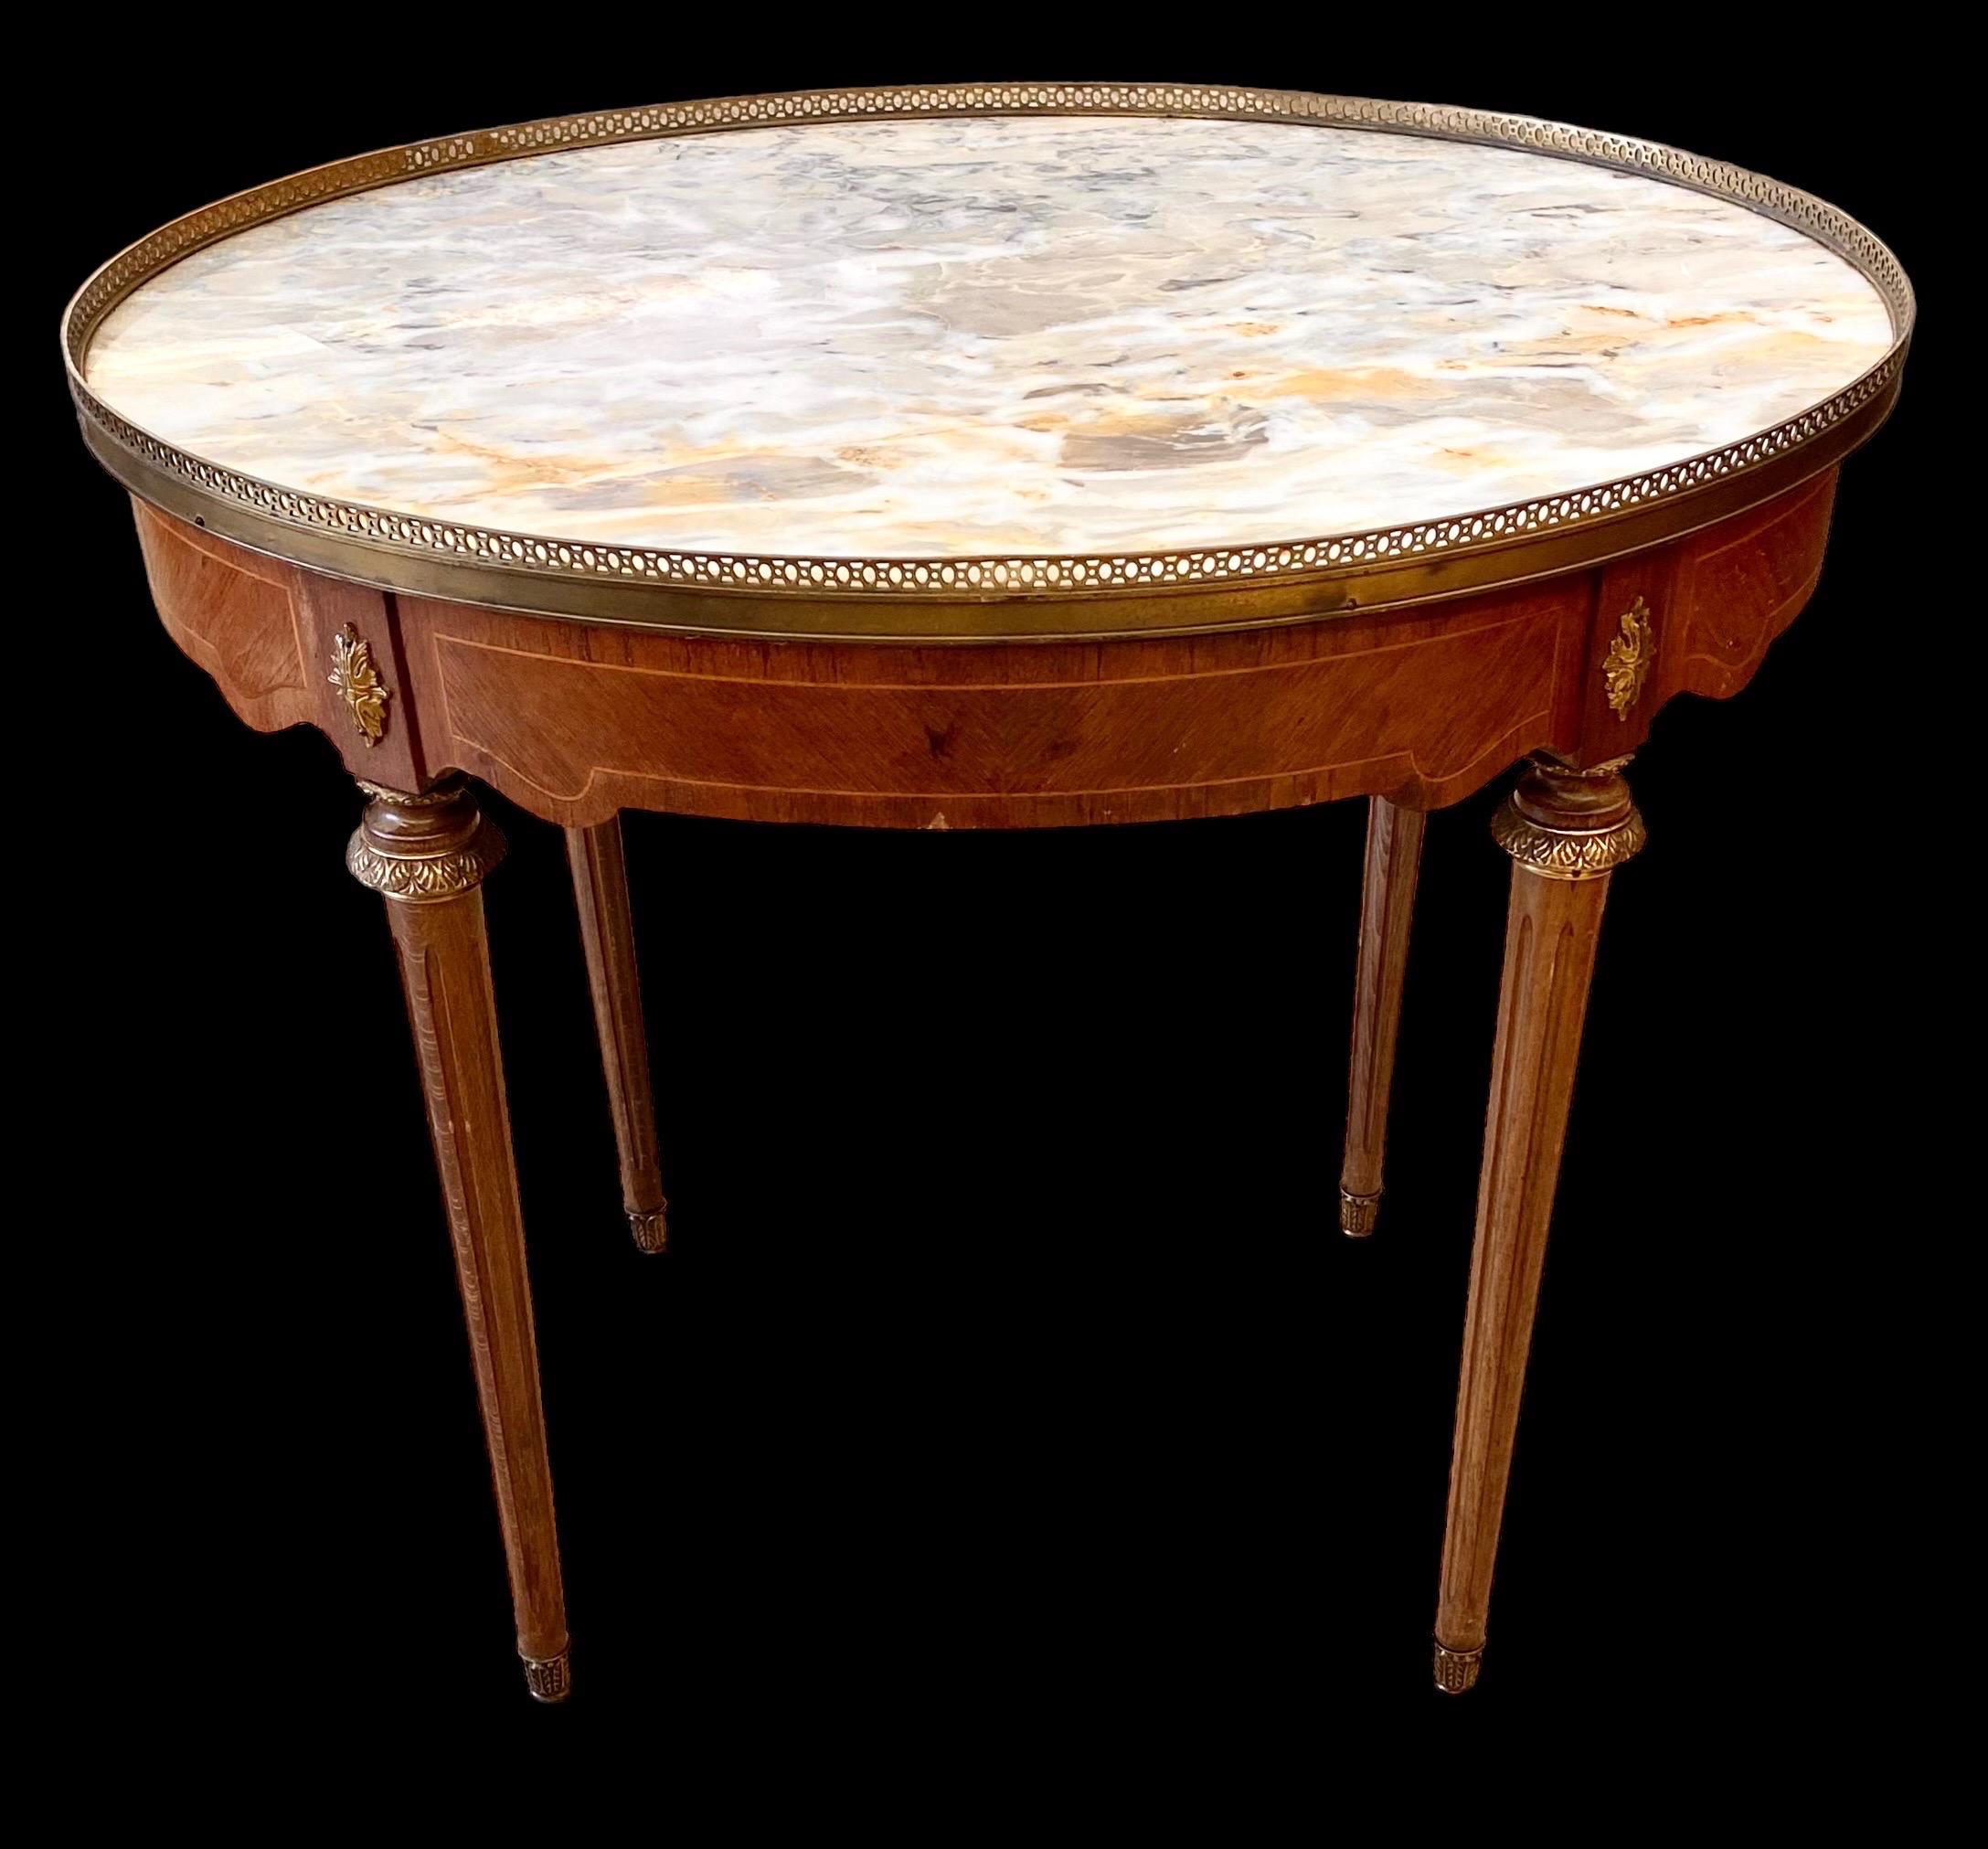 French Louis XVI Style Inlaid Carved Walnut
Marble Top Bouillotte Table, 20th c., the oval brass galleried white marble top over a wide skirt with one frieze drawer, on turned tapered legs with ormolu sabots. 

A 20th century Louis XVI style